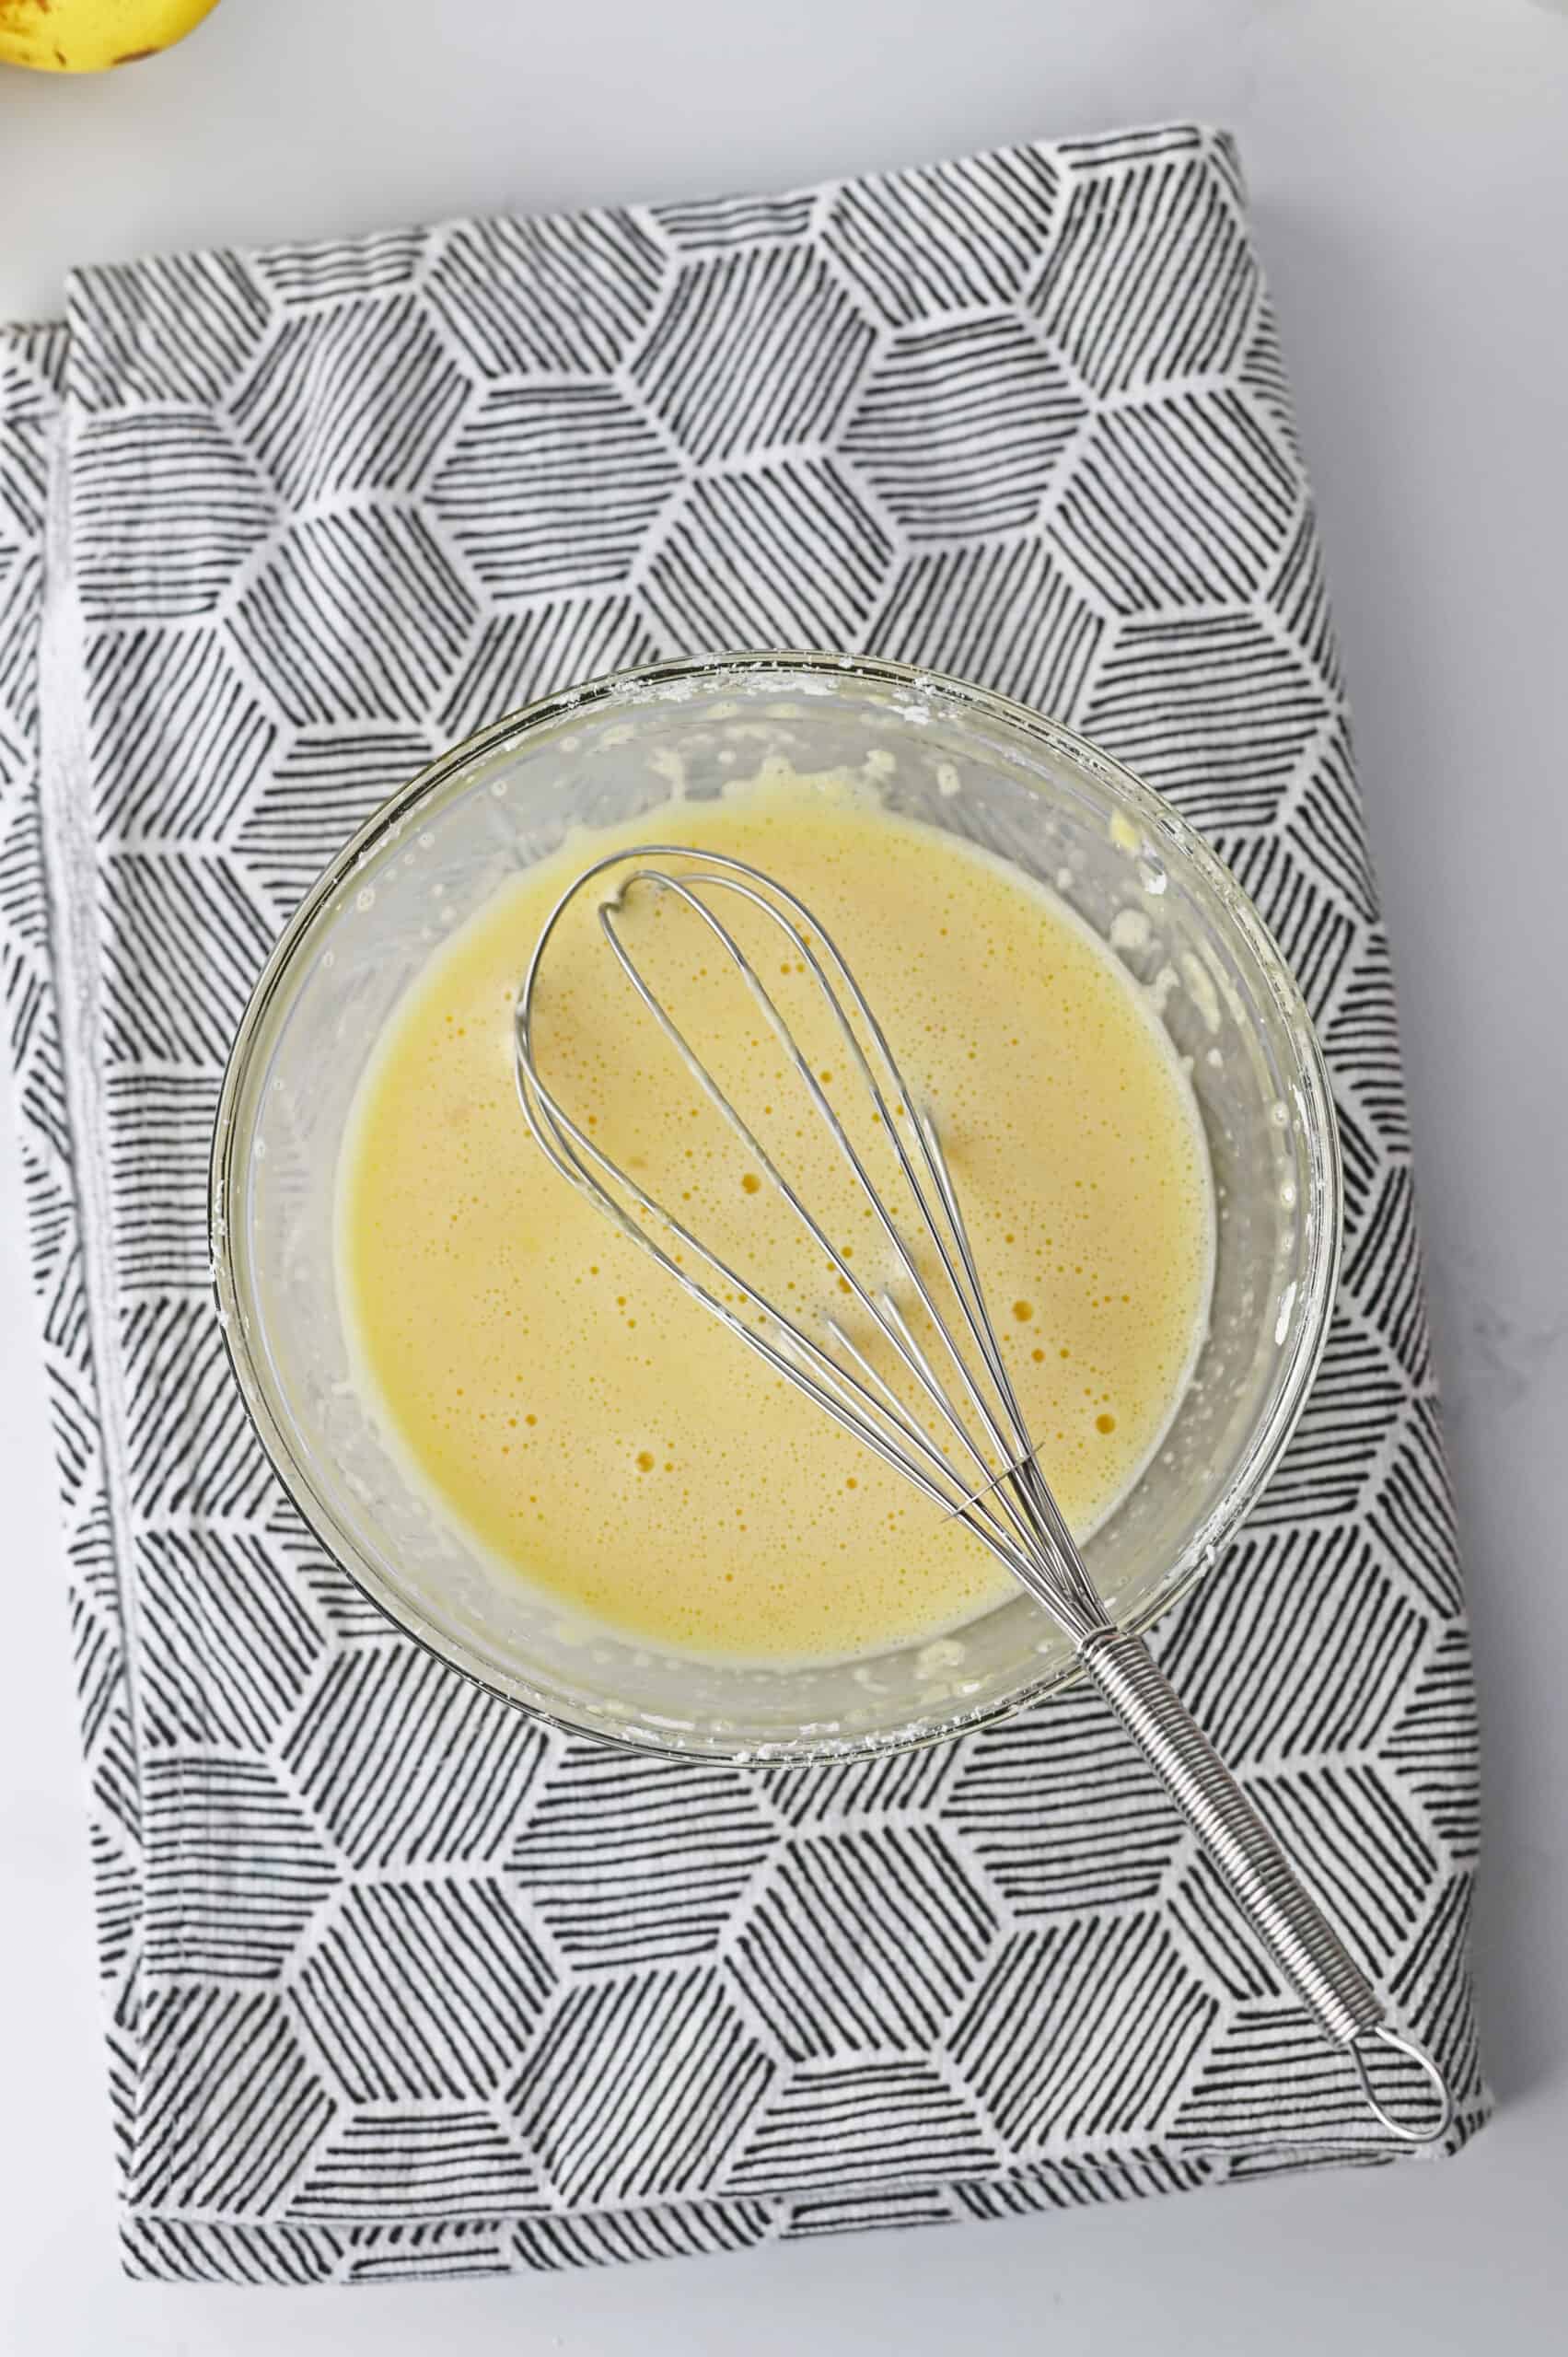 Remove ½ cup of the hot milk mixture, and whisk into the eggs and cornstarch to temper the eggs for the custard for banana cream pie